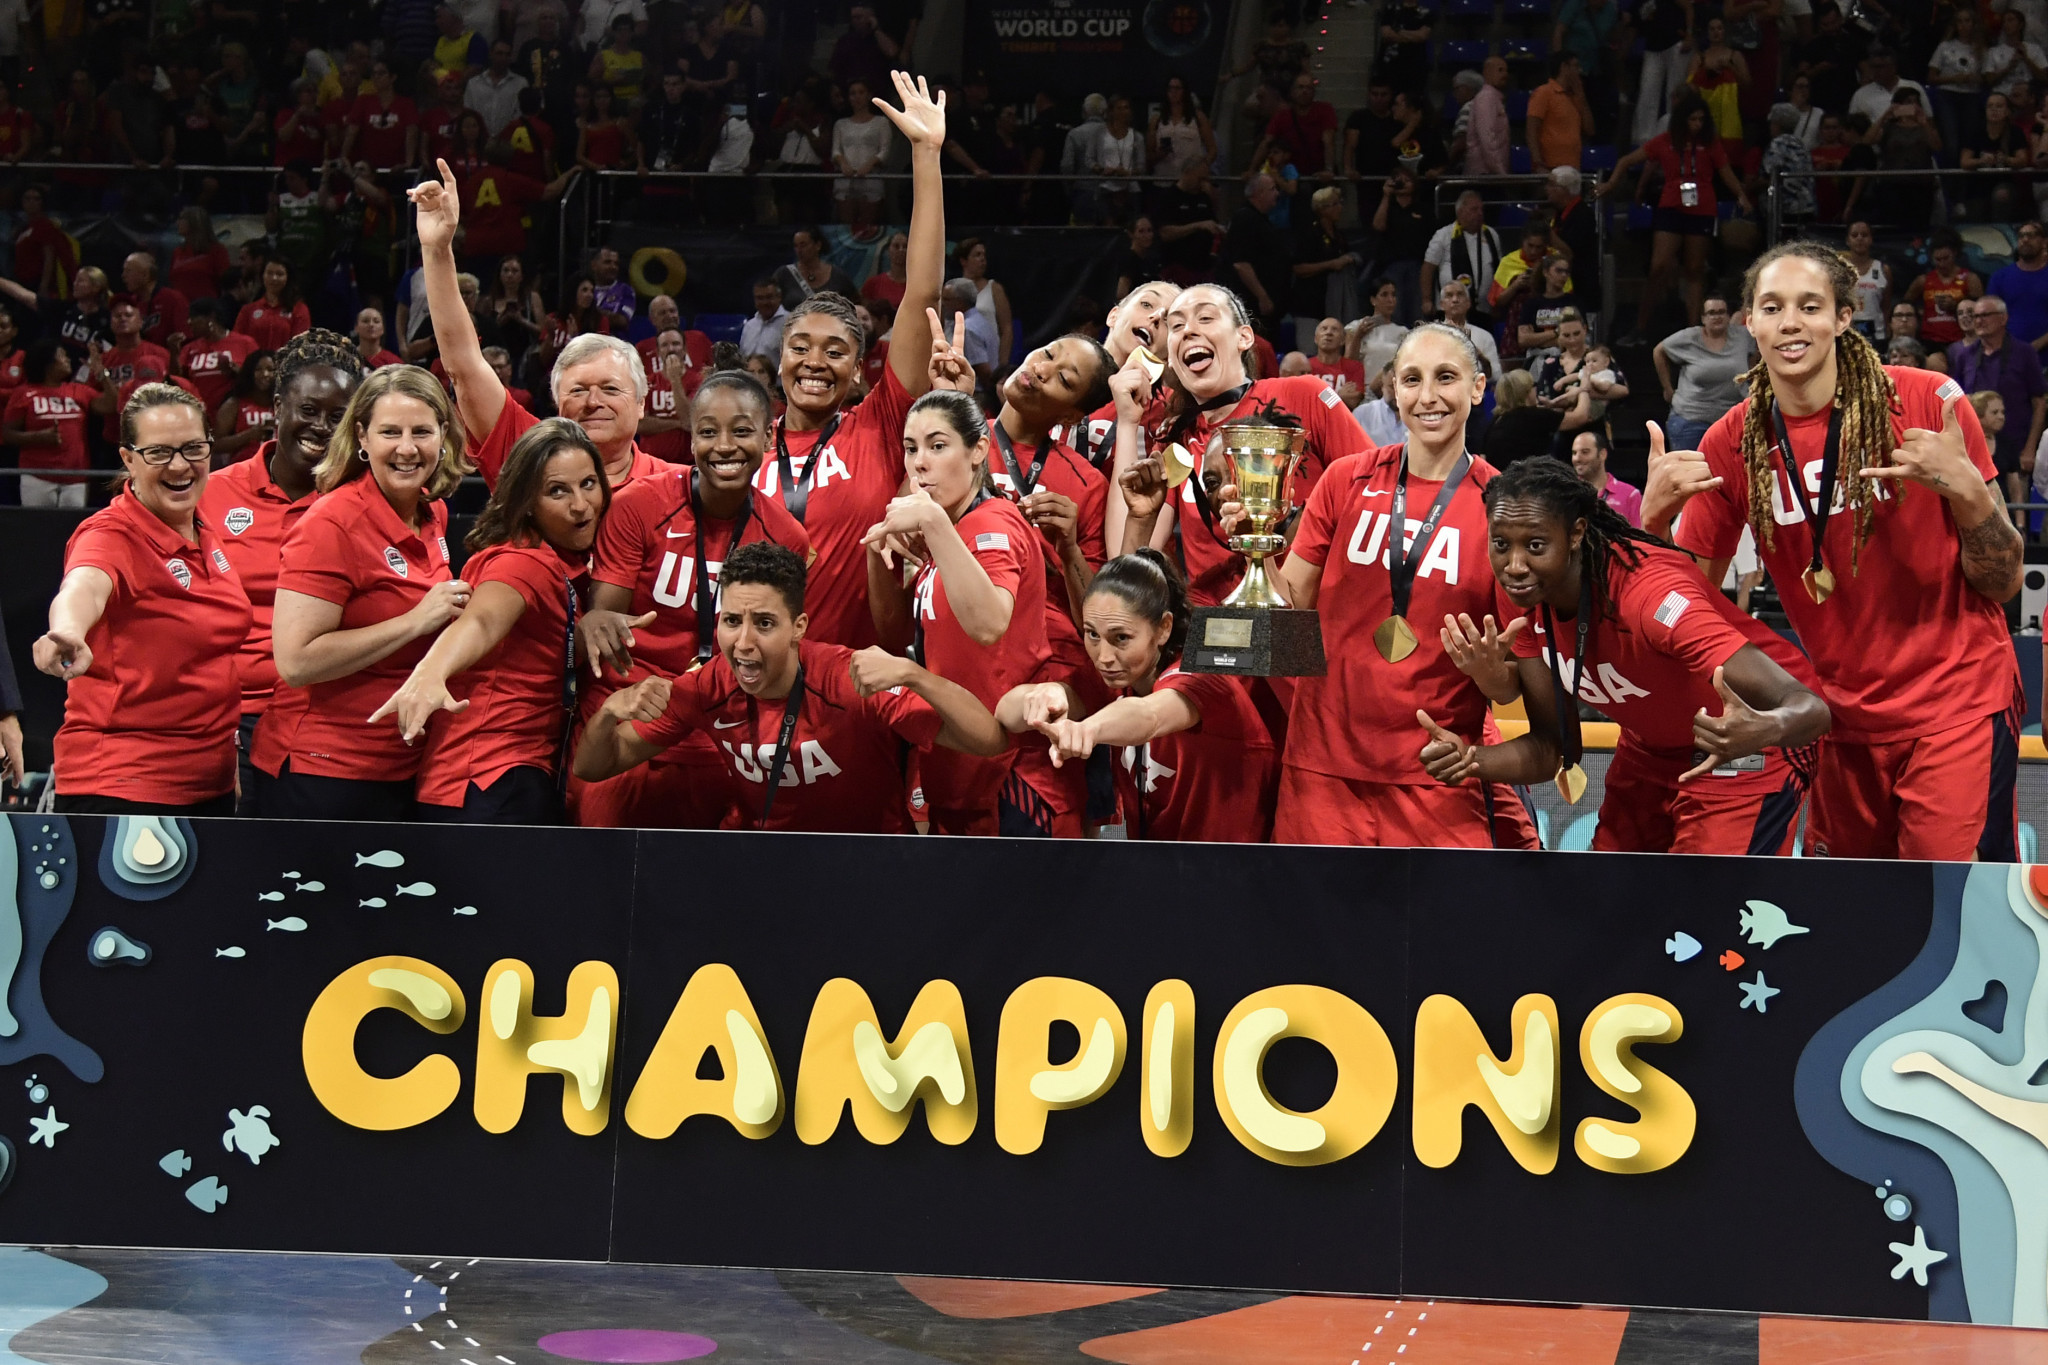 The USA's women's basketball team who won gold at the FIBA Basketball World Cup have been nominated for team of the month in the Best of September for Team USA awards ©Getty Images